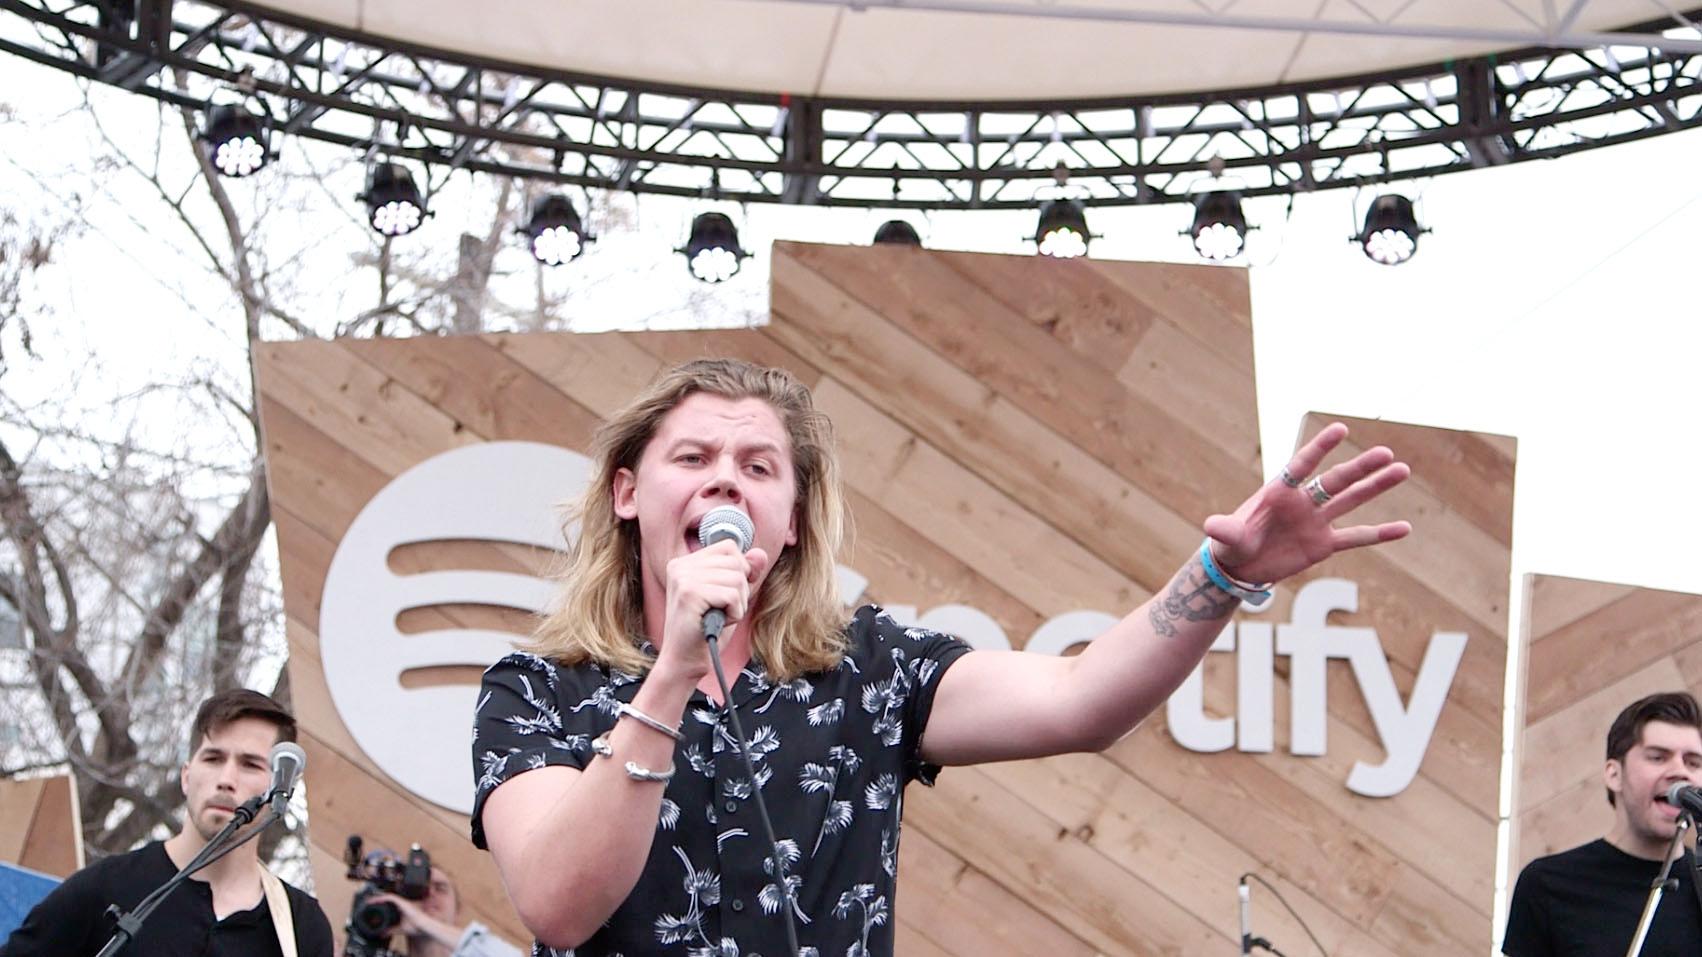 Australian singer Conrad Sewell performs at the Spotify House at SXSW 2015.